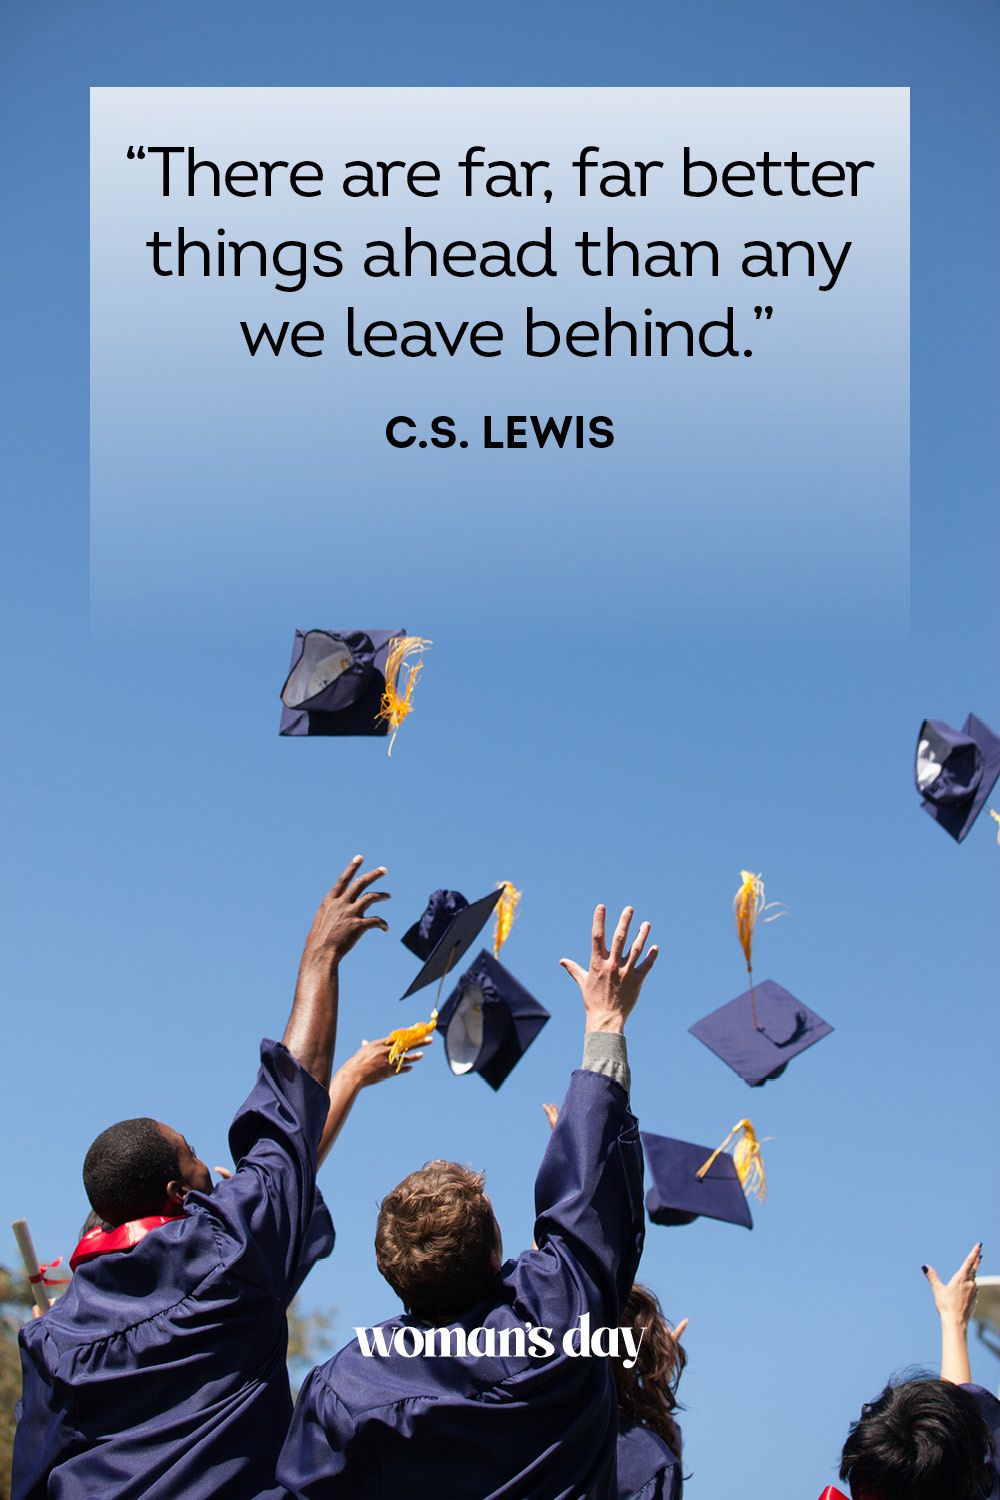 high school graduation quotes for son